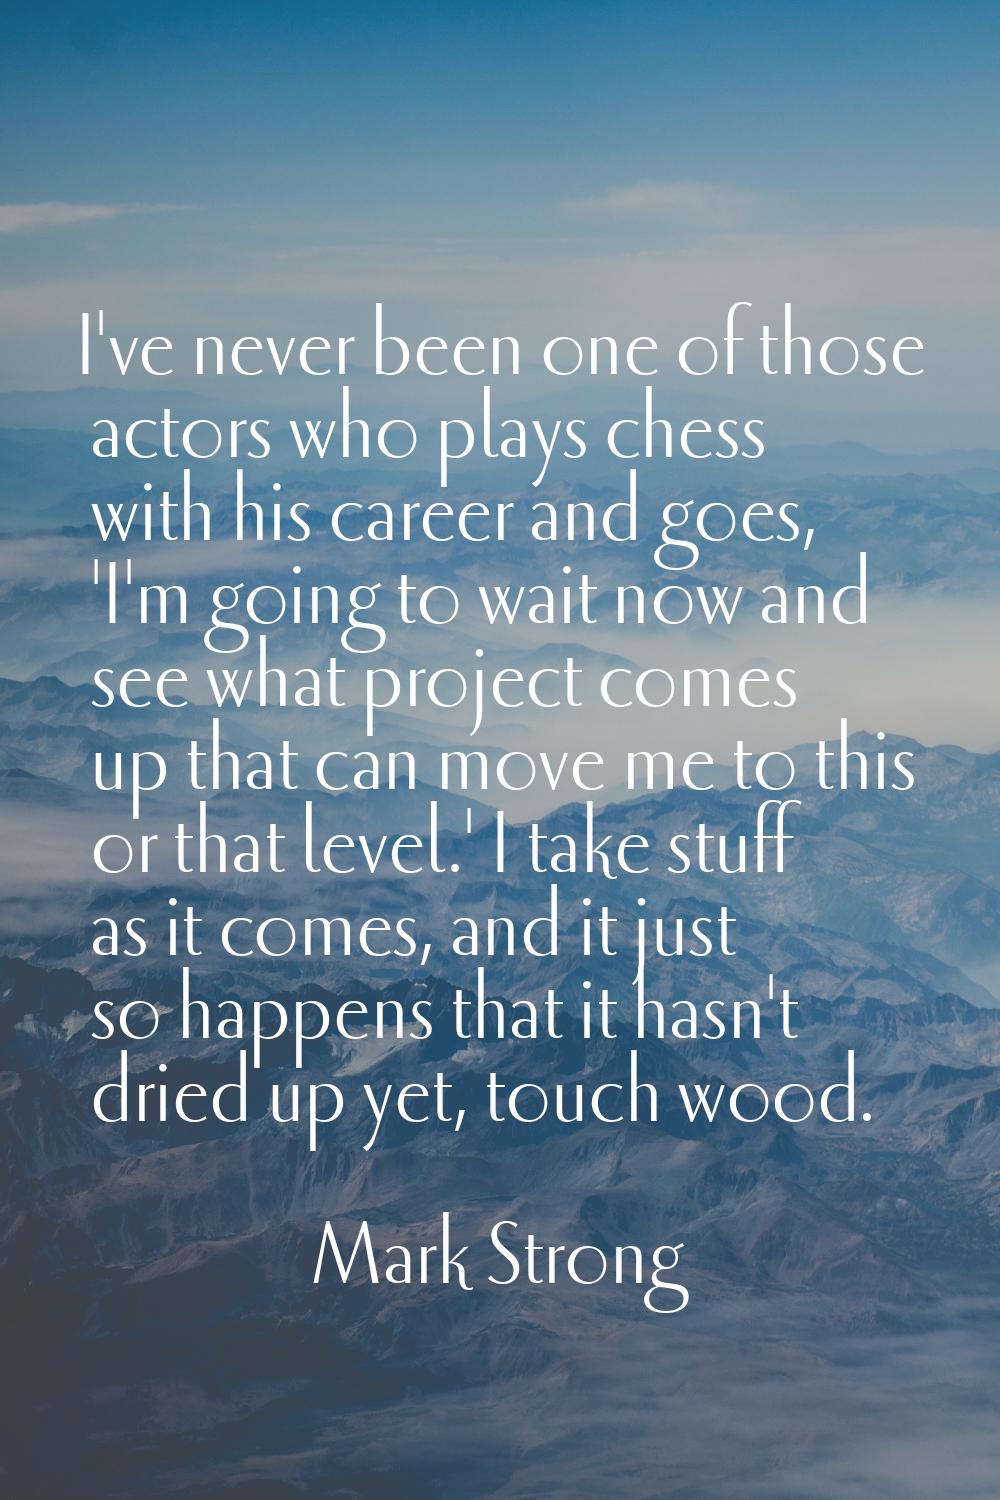 I've never been one of those actors who plays chess with his career and goes, 'I'm going to wait no